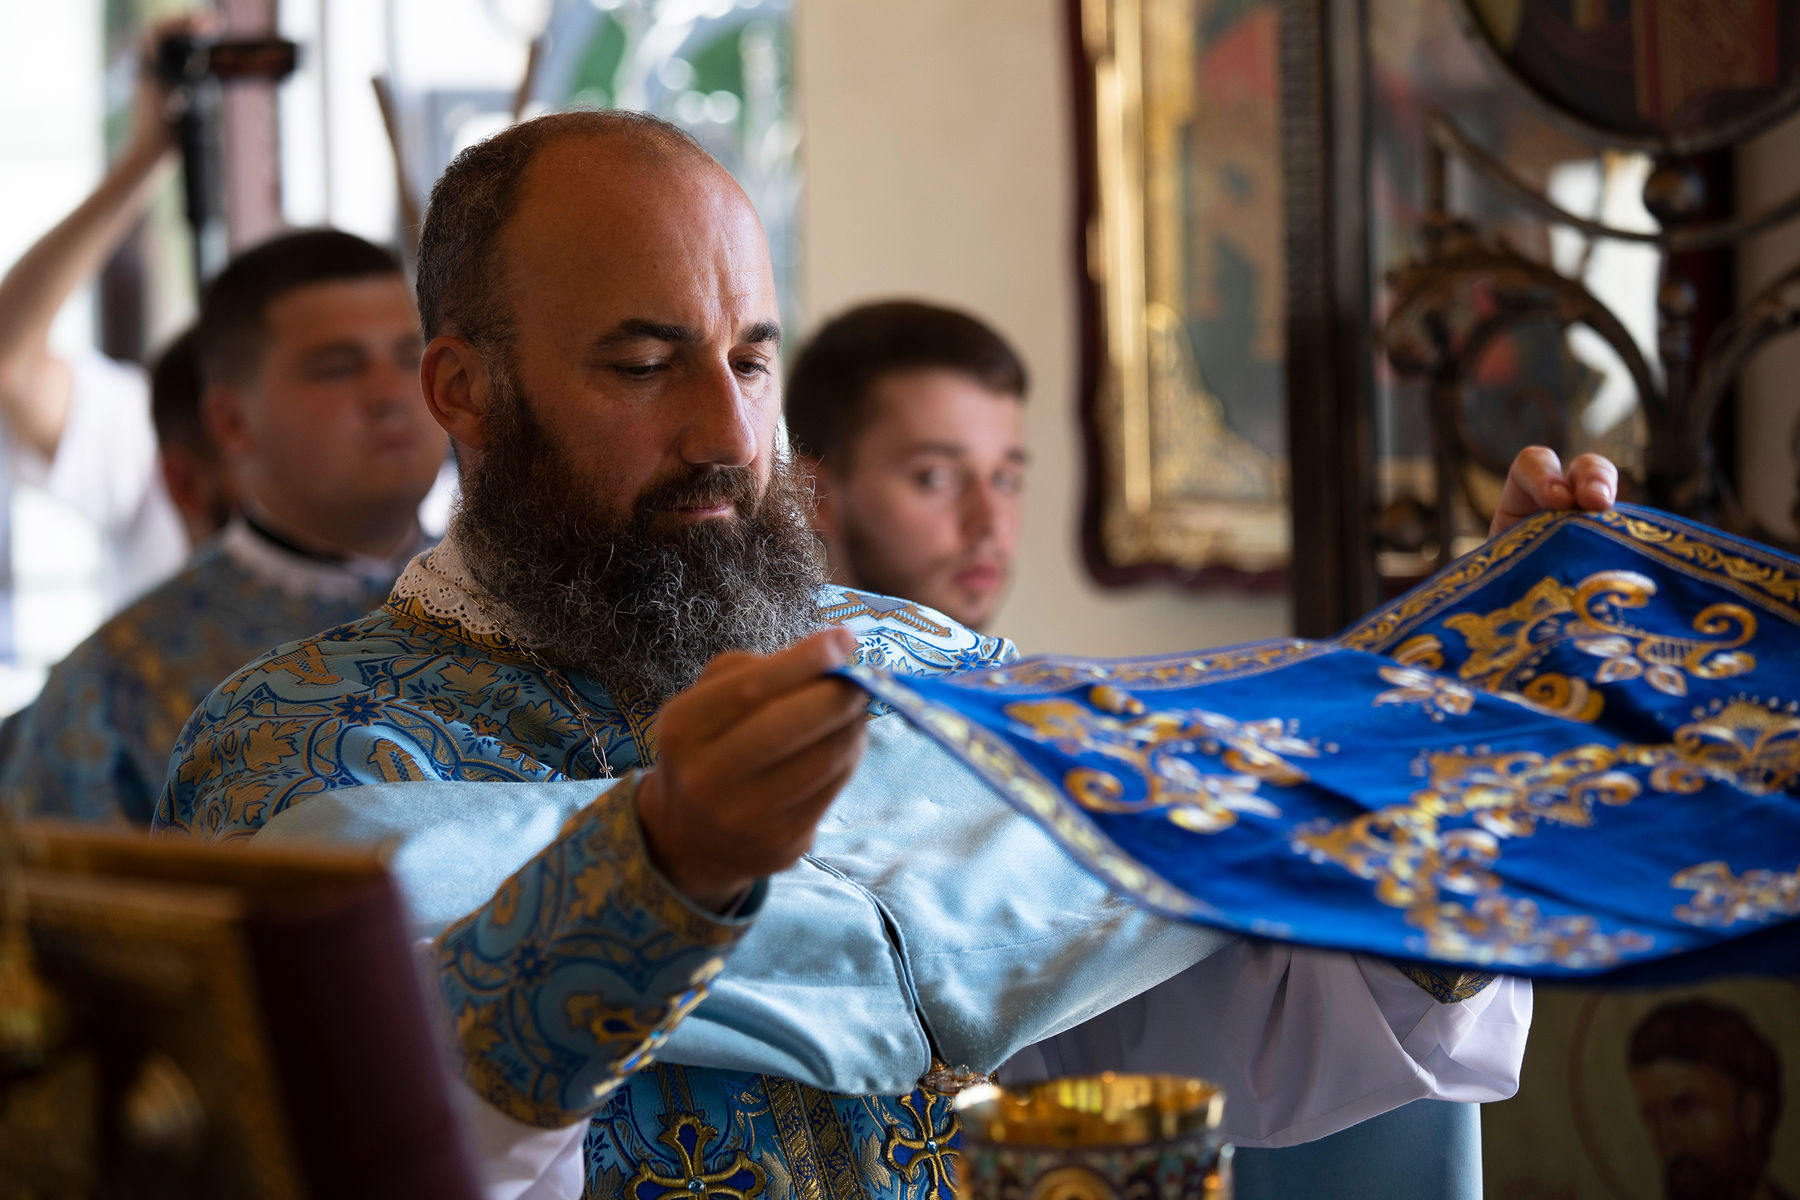 “I spent a few days contemplating whether to accept this appointment”: Father Jonah Maxim on being named Metropolitan of Prešov